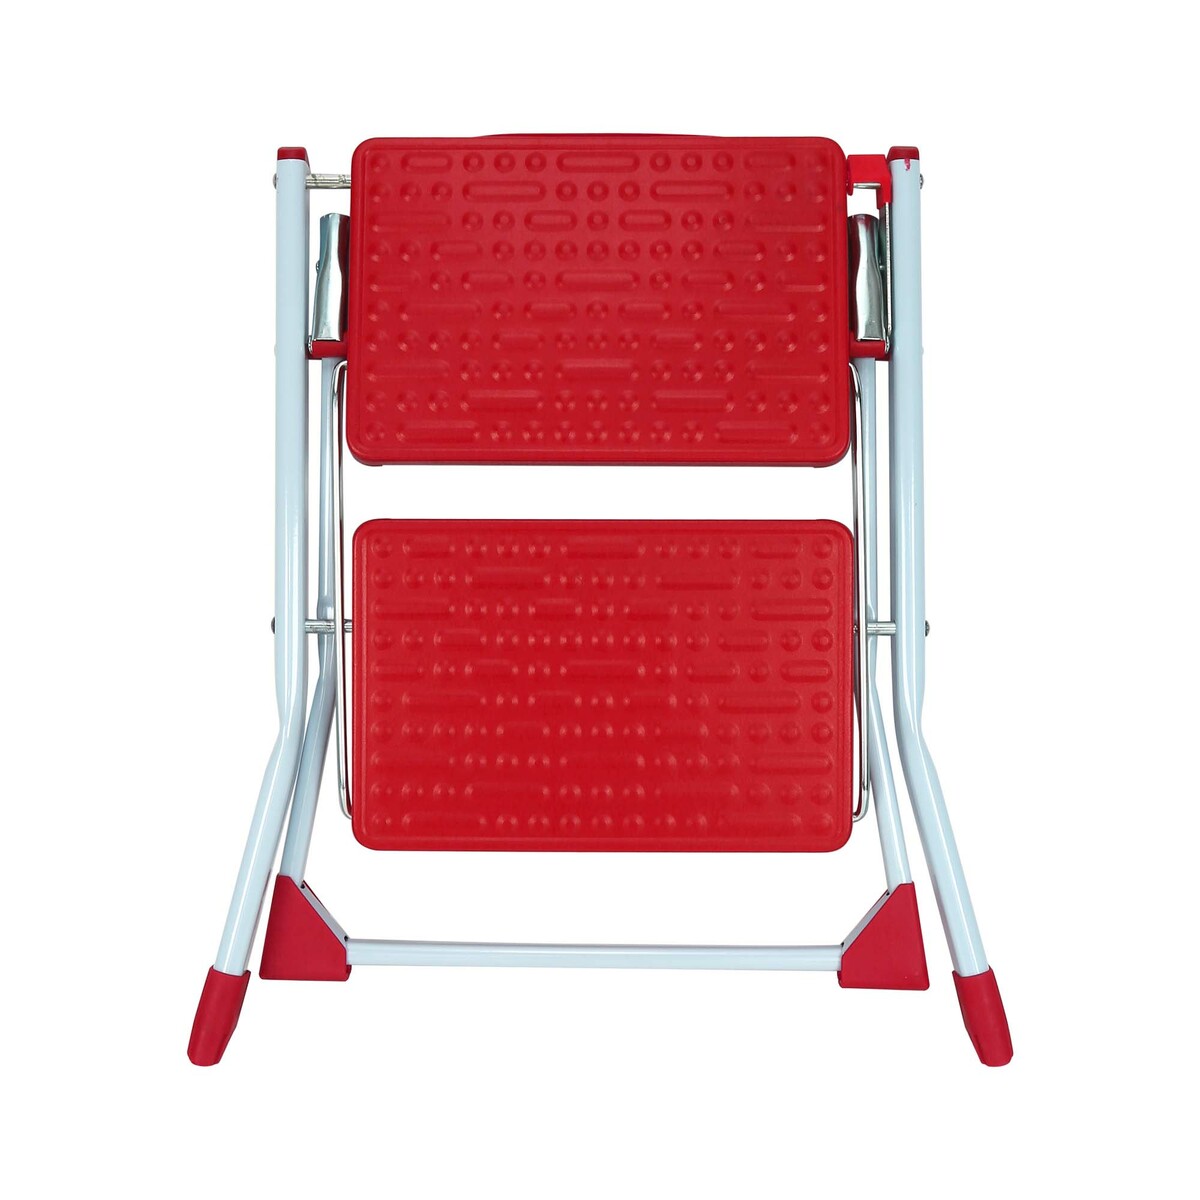 Step Ladder 2 Step PT-6202D Small Assorted Colors